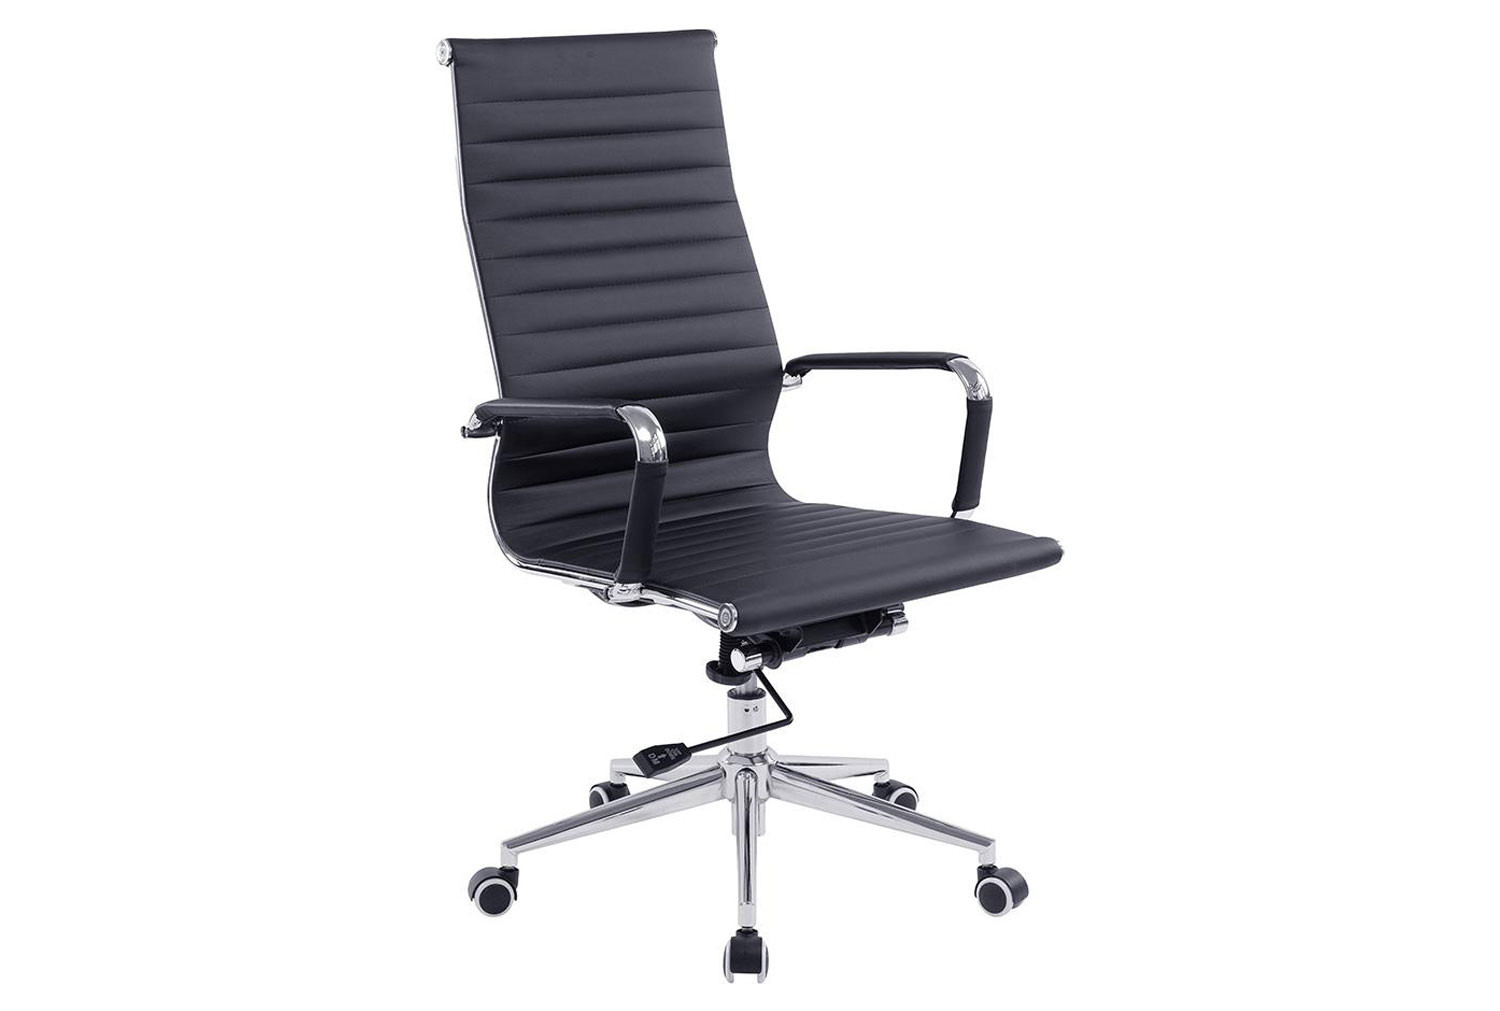 Andruzzi High Back Black Bonded Leather Executive Office Chair, Black, Fully Installed